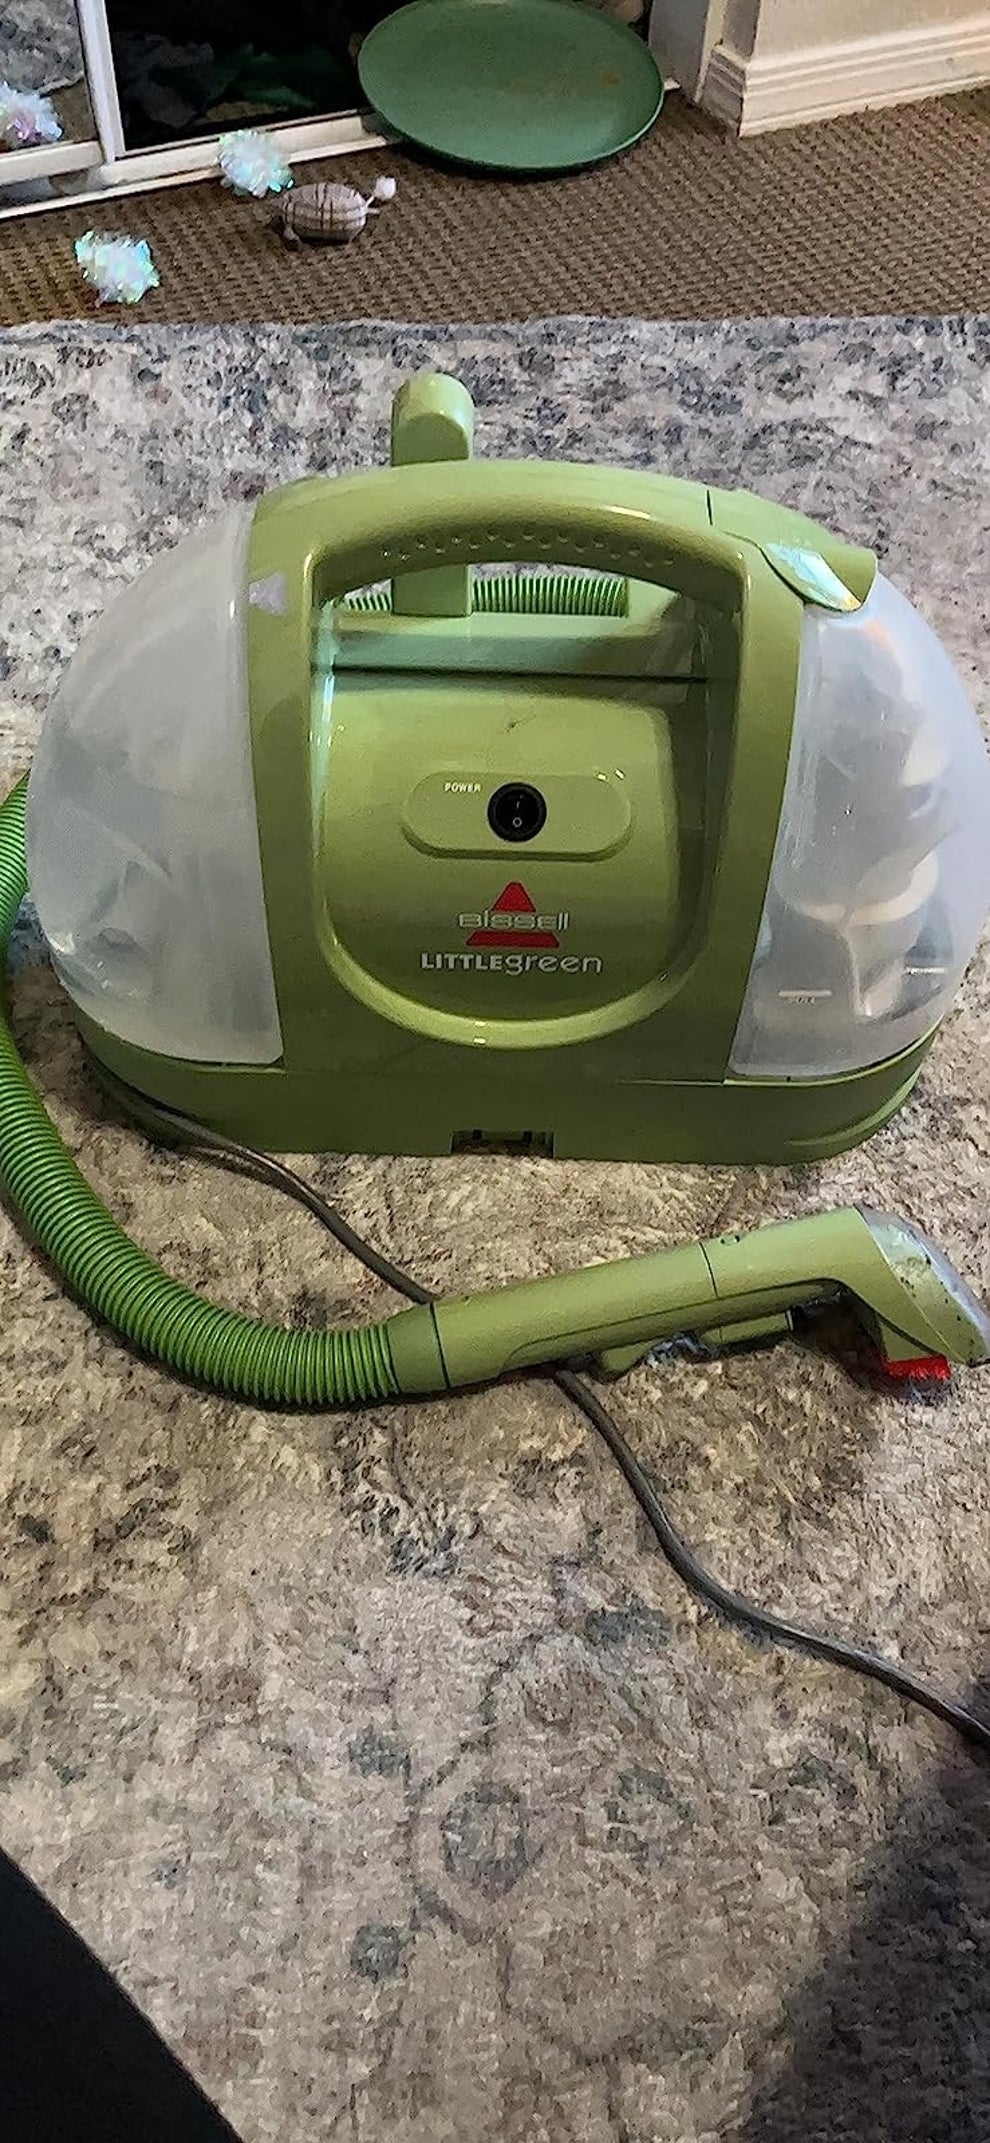 The Bissell Little Green Saved My Carpets—And It's 28% Off For